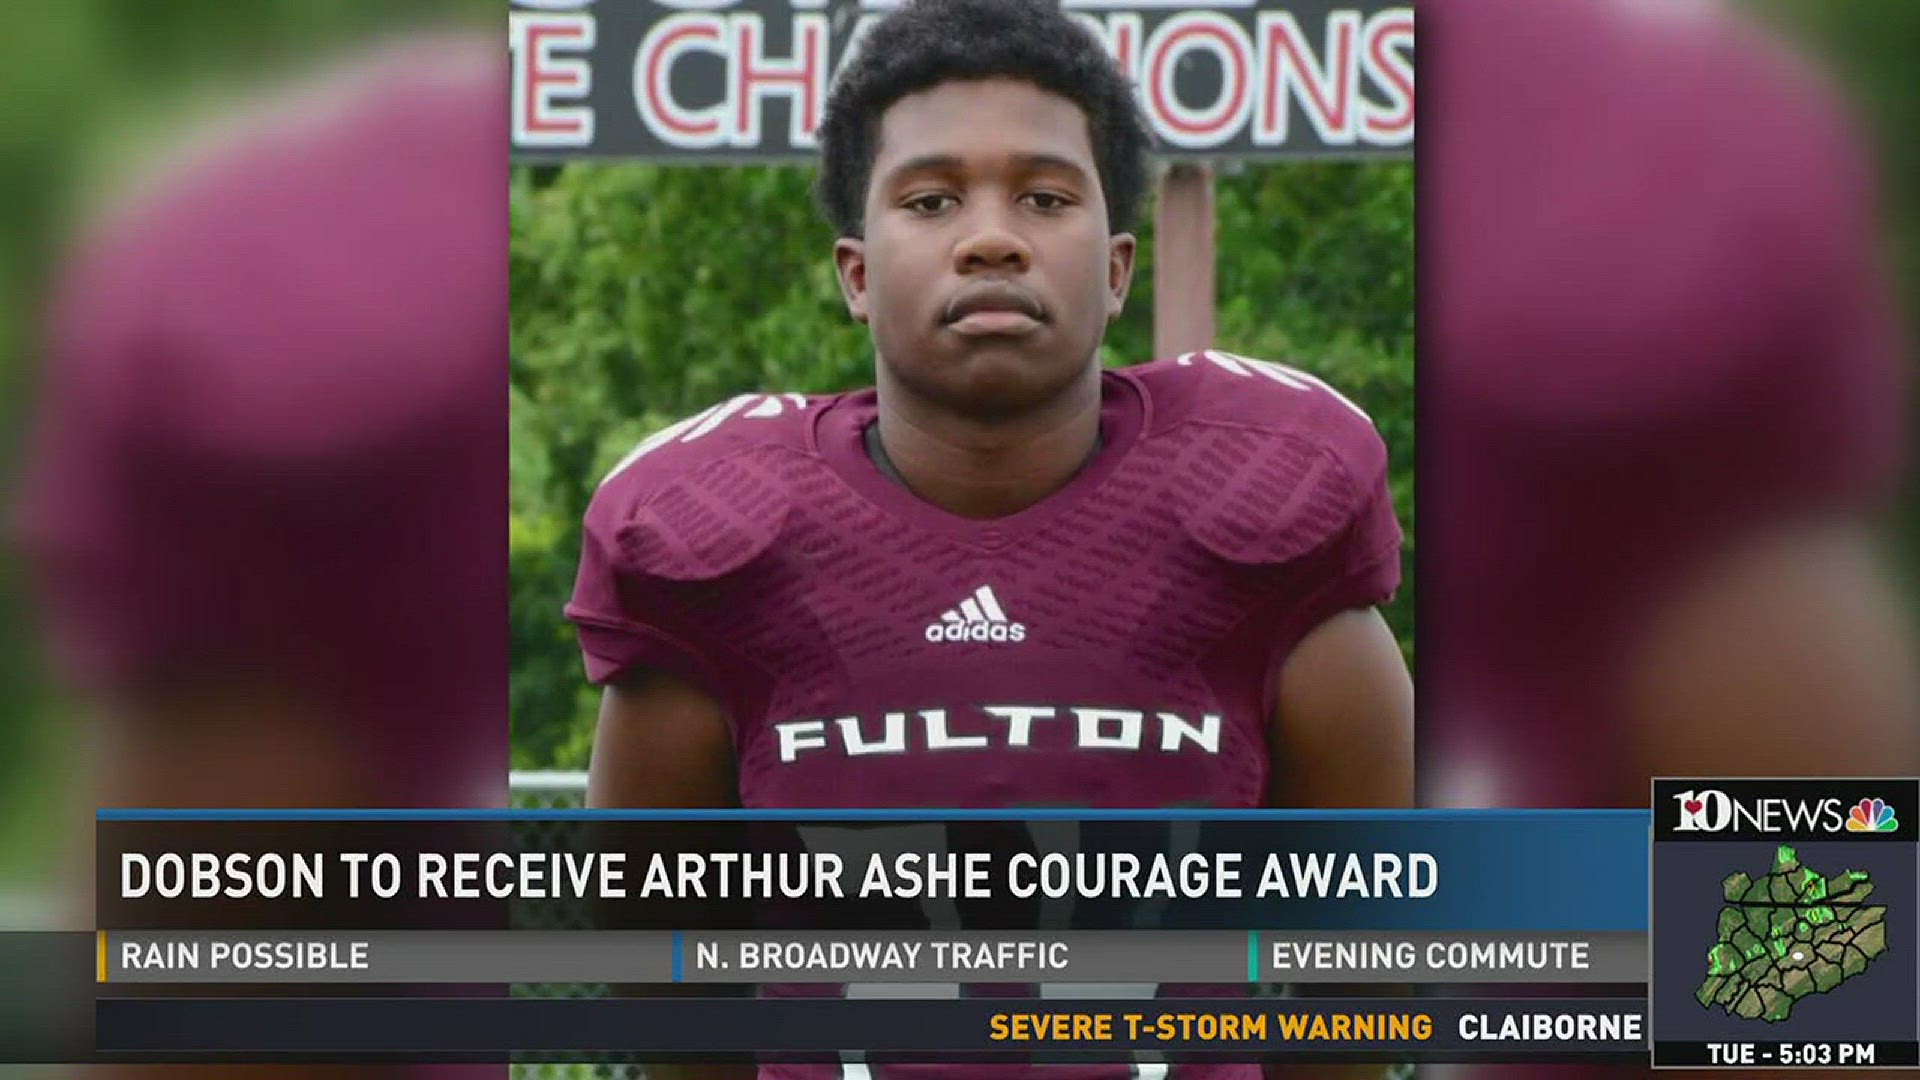 The nation will hear of Dobson's sacrifice, when he receives the prestigious Arthur Ashe Courage Award next month, at the ESPYs.